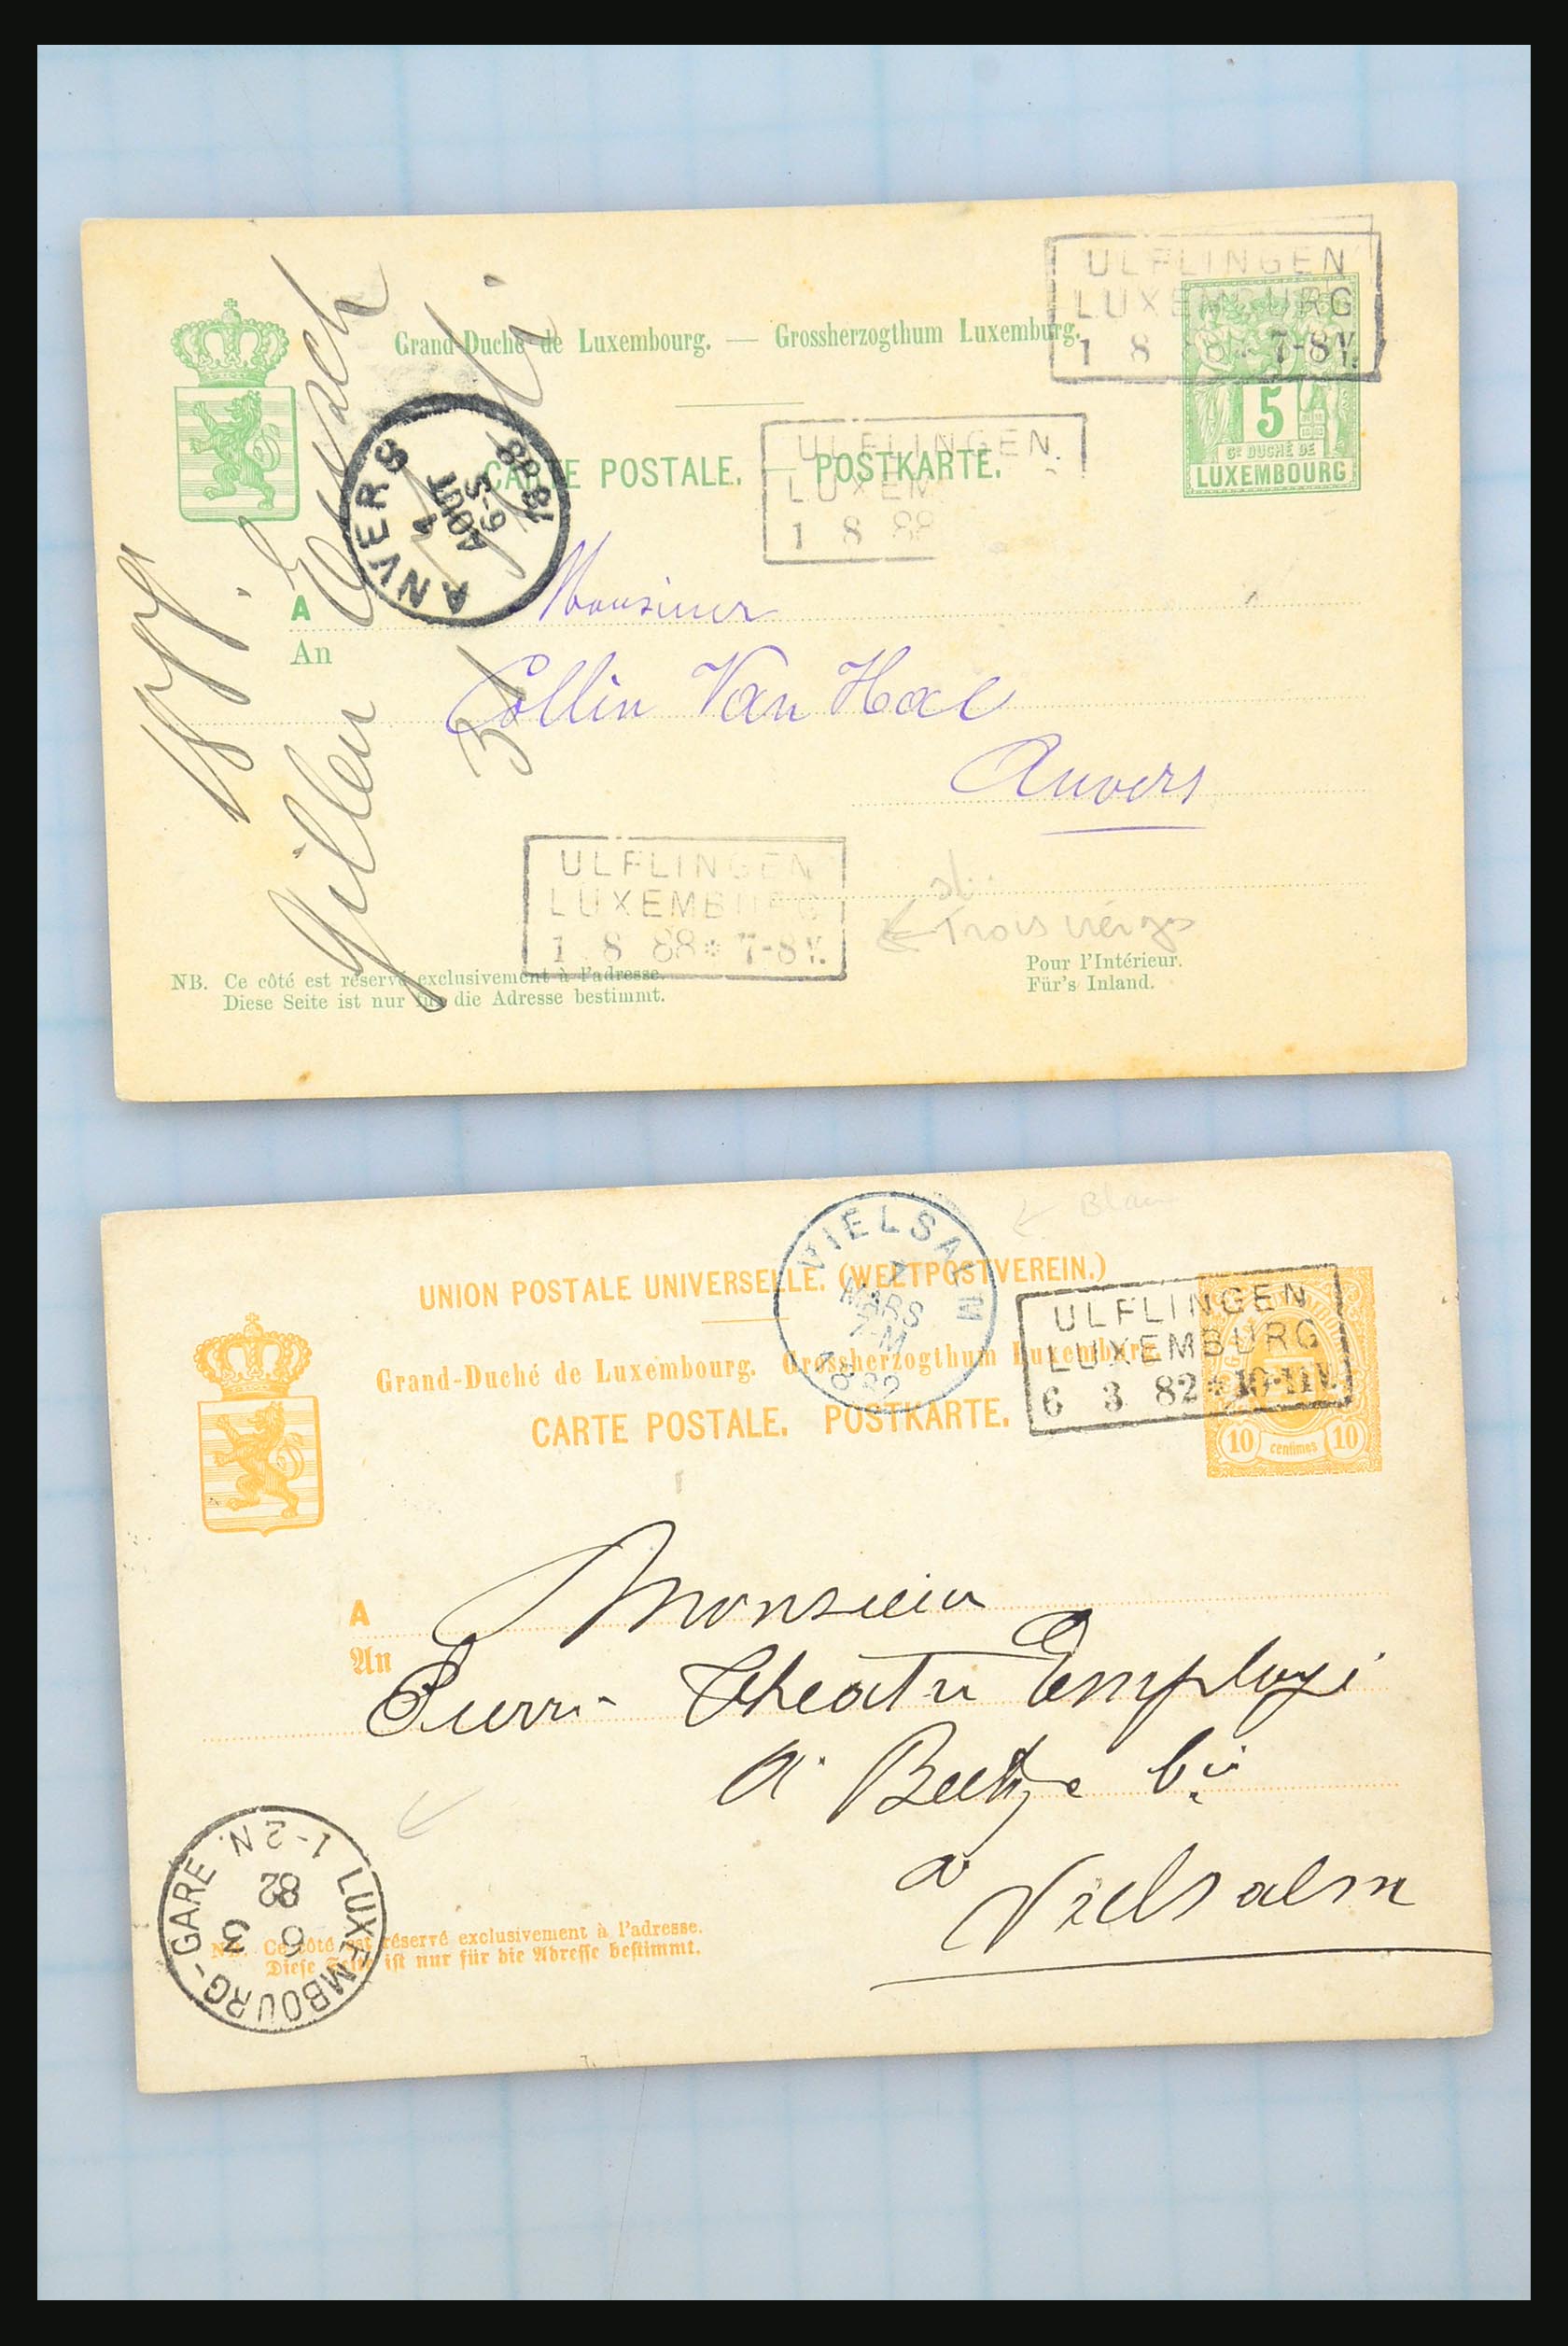 31358 097 - 31358 Portugal/Luxemburg/Greece covers 1880-1960.